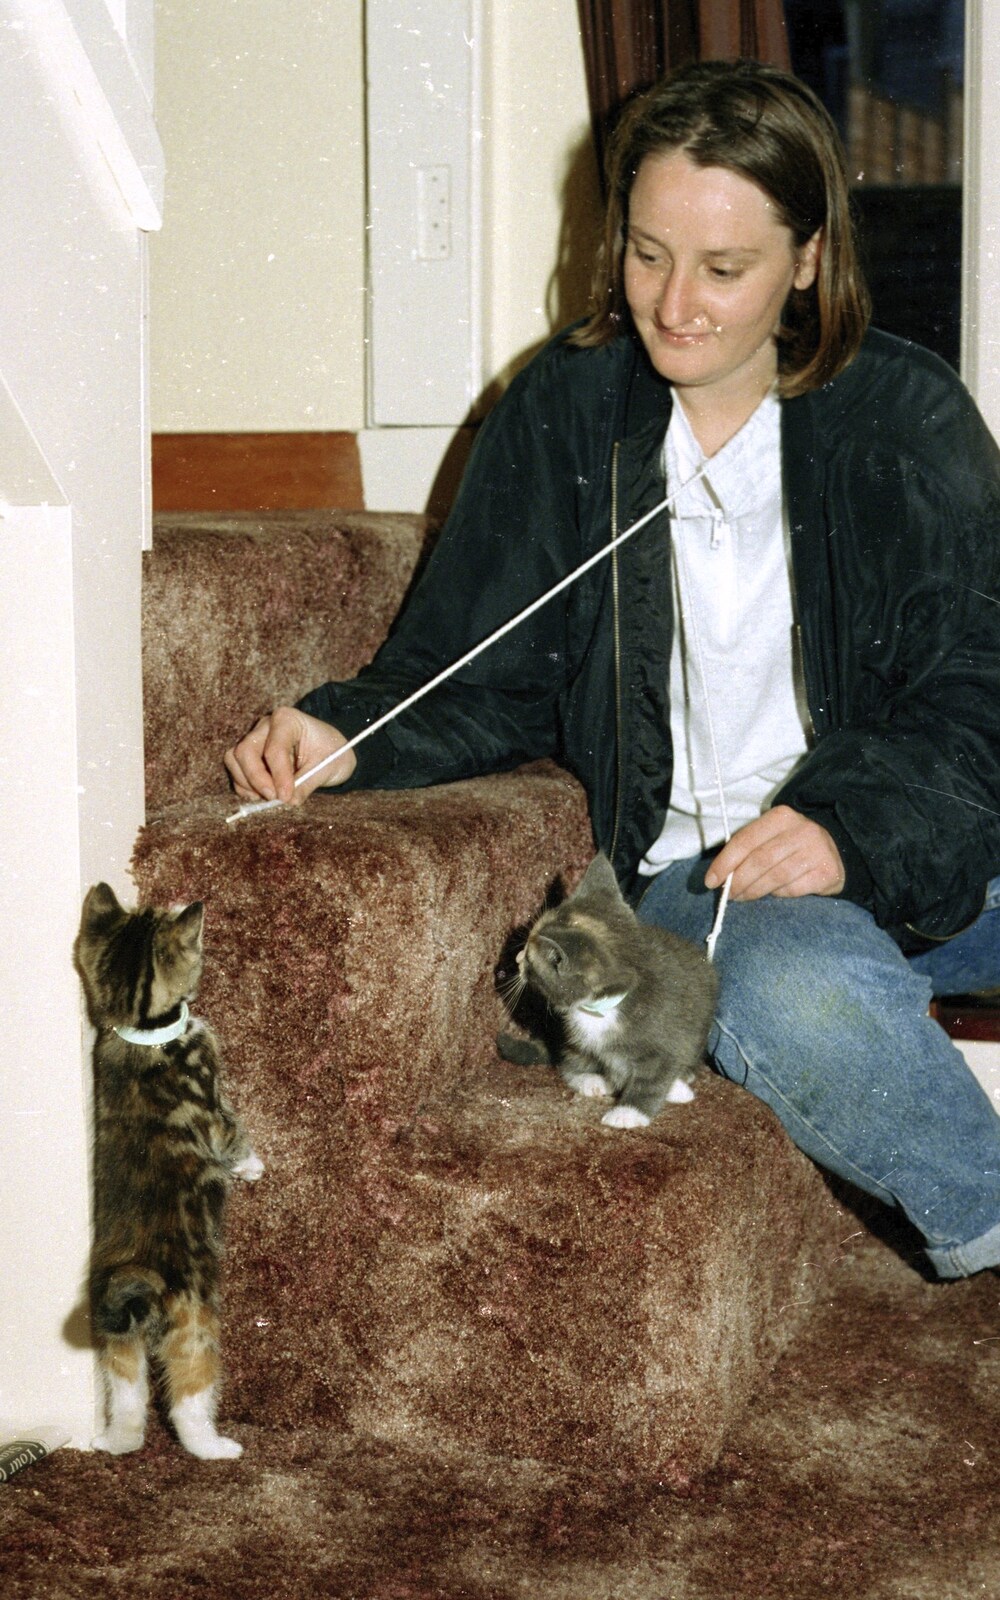 Jo torments kittens with string from House Renovation Randomness and a Spot of Lightning, Brome, Suffolk - 19th June 1994